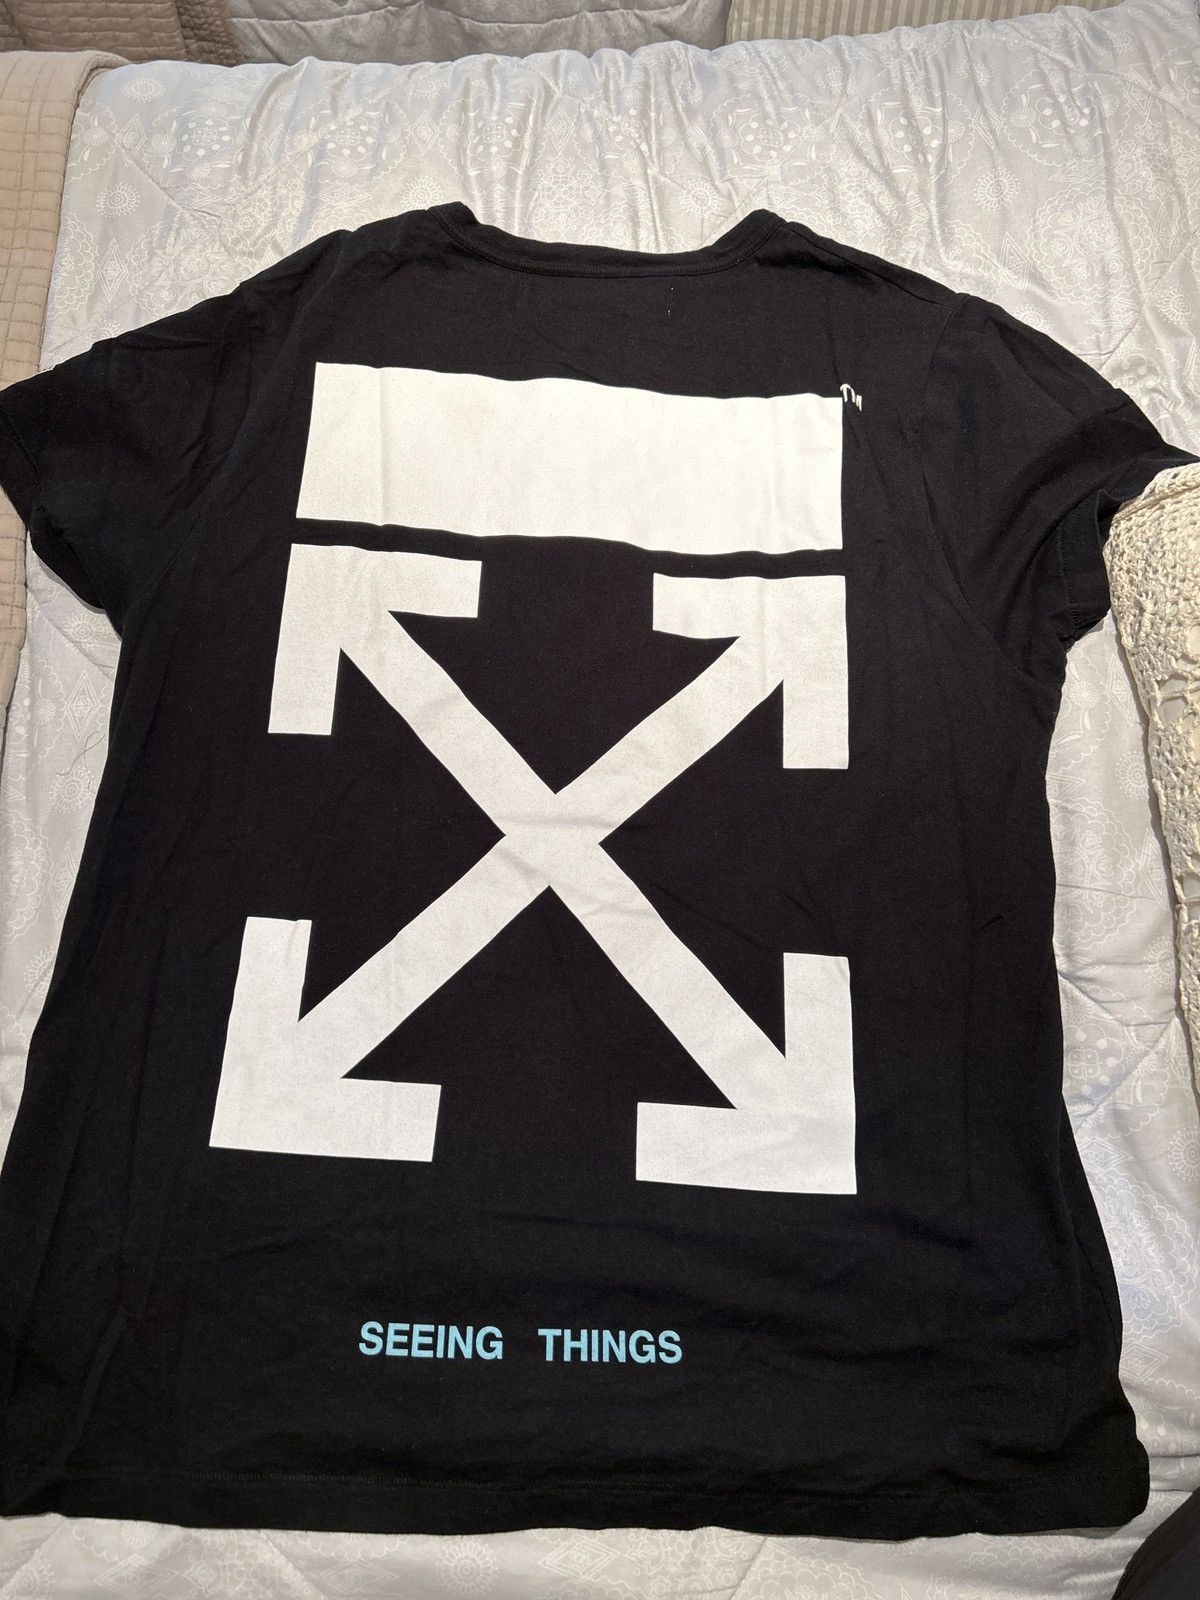 Off-White Off white seeing things t shirt | Grailed